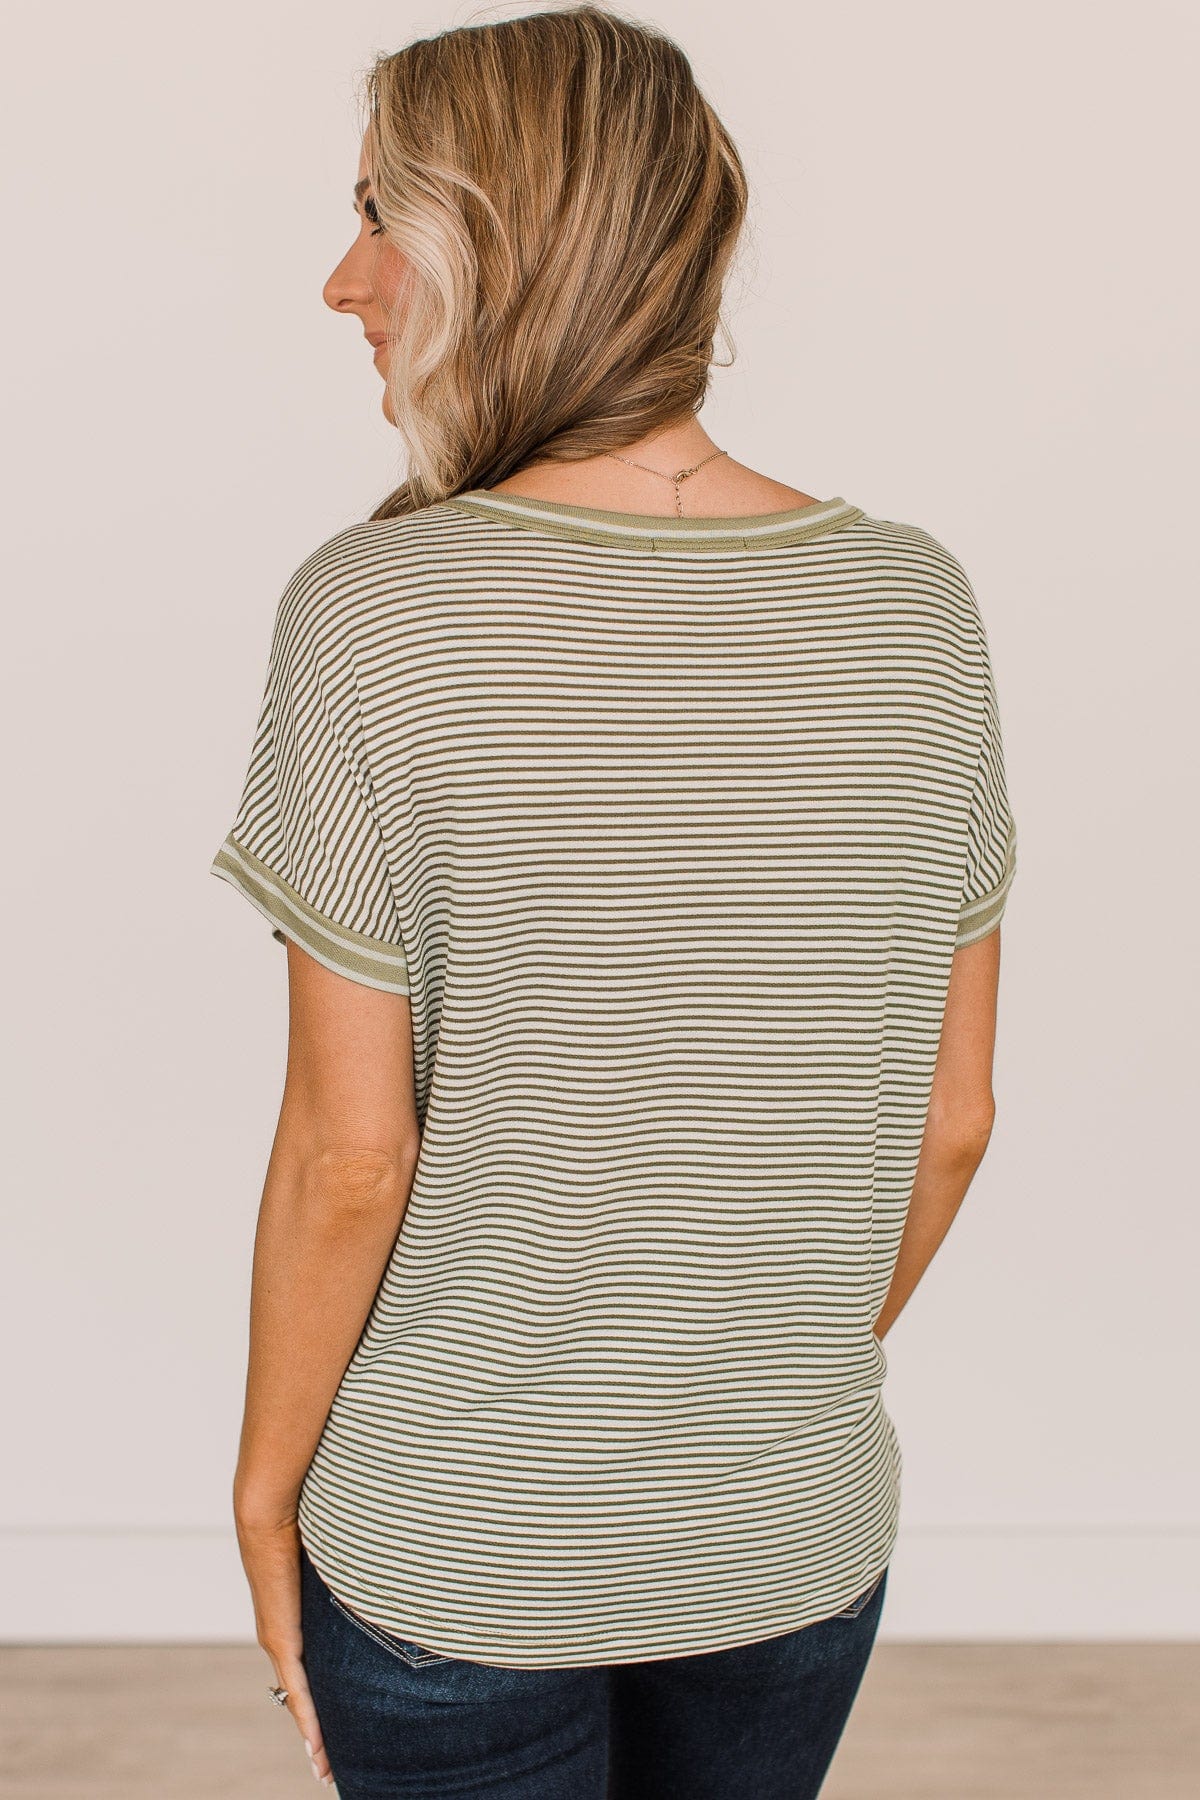 In The Right Direction Striped Top- Ivory & Olive